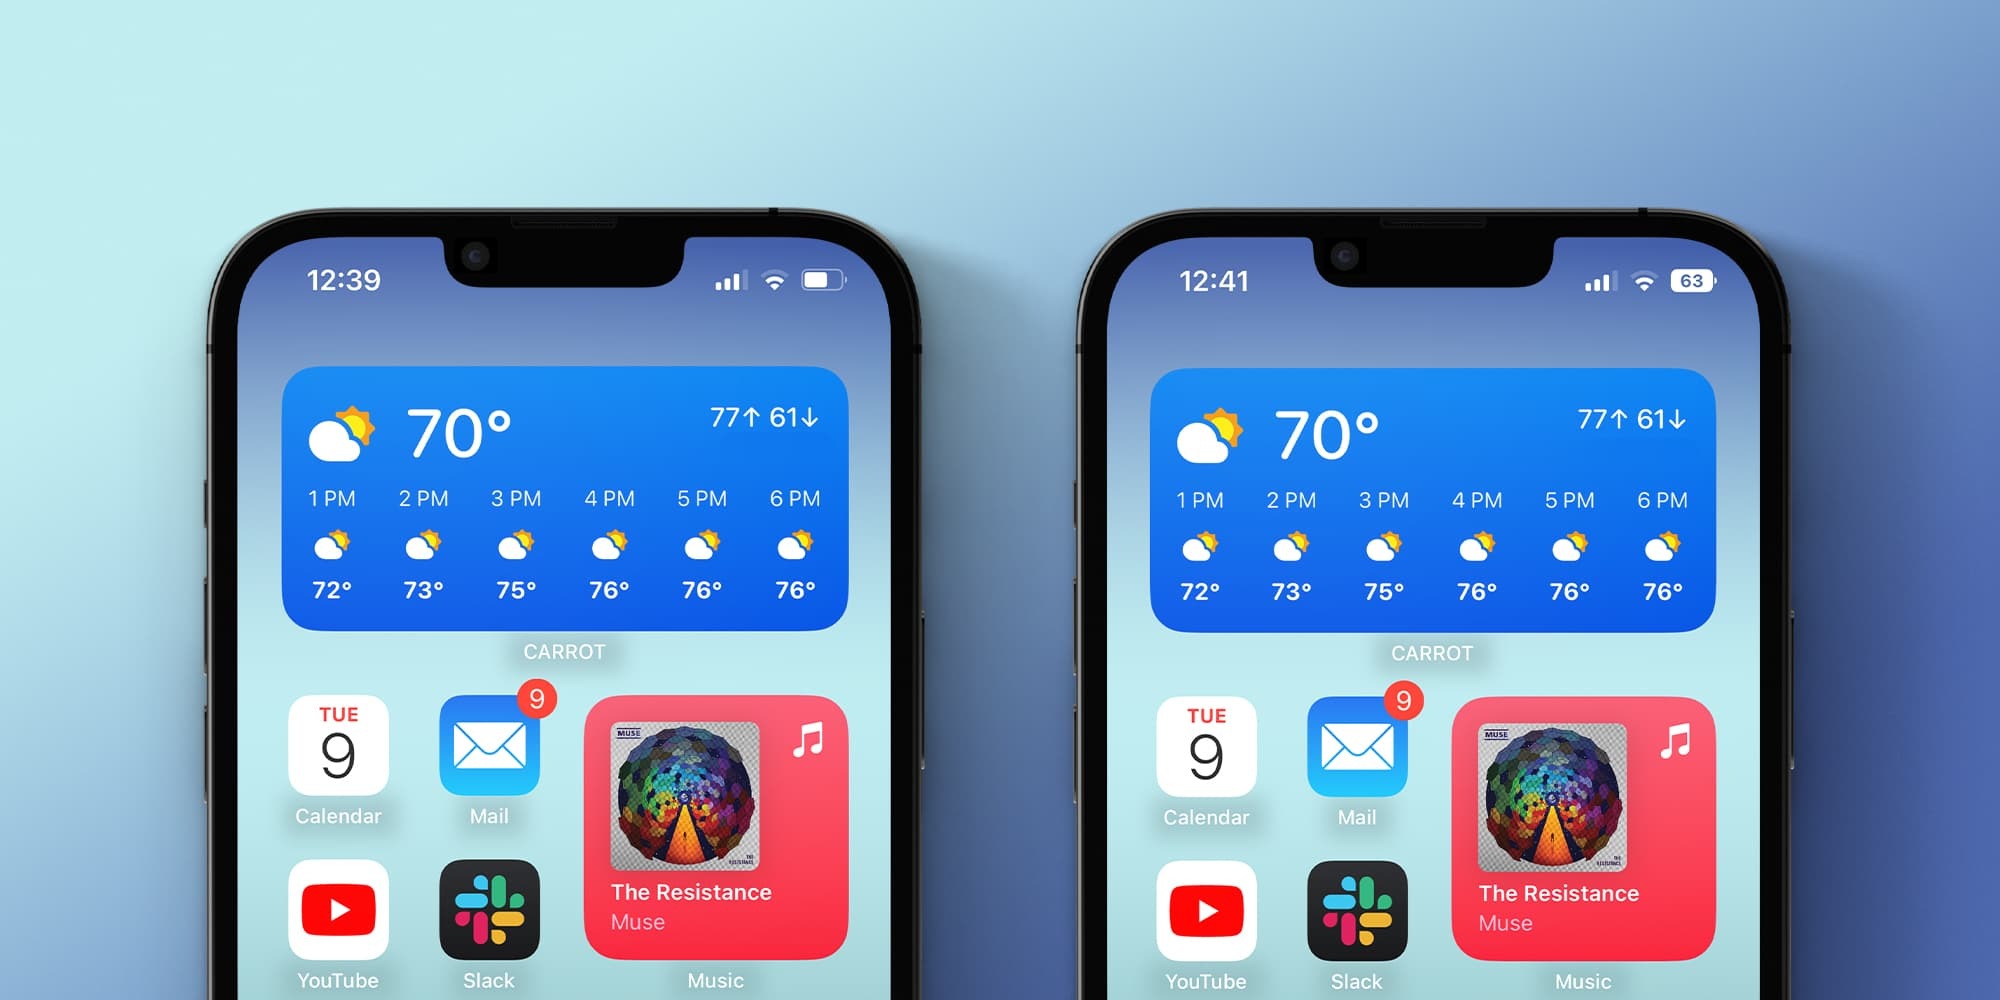 Poll: Which implementation of the new battery indicator for iPhone do you prefer?